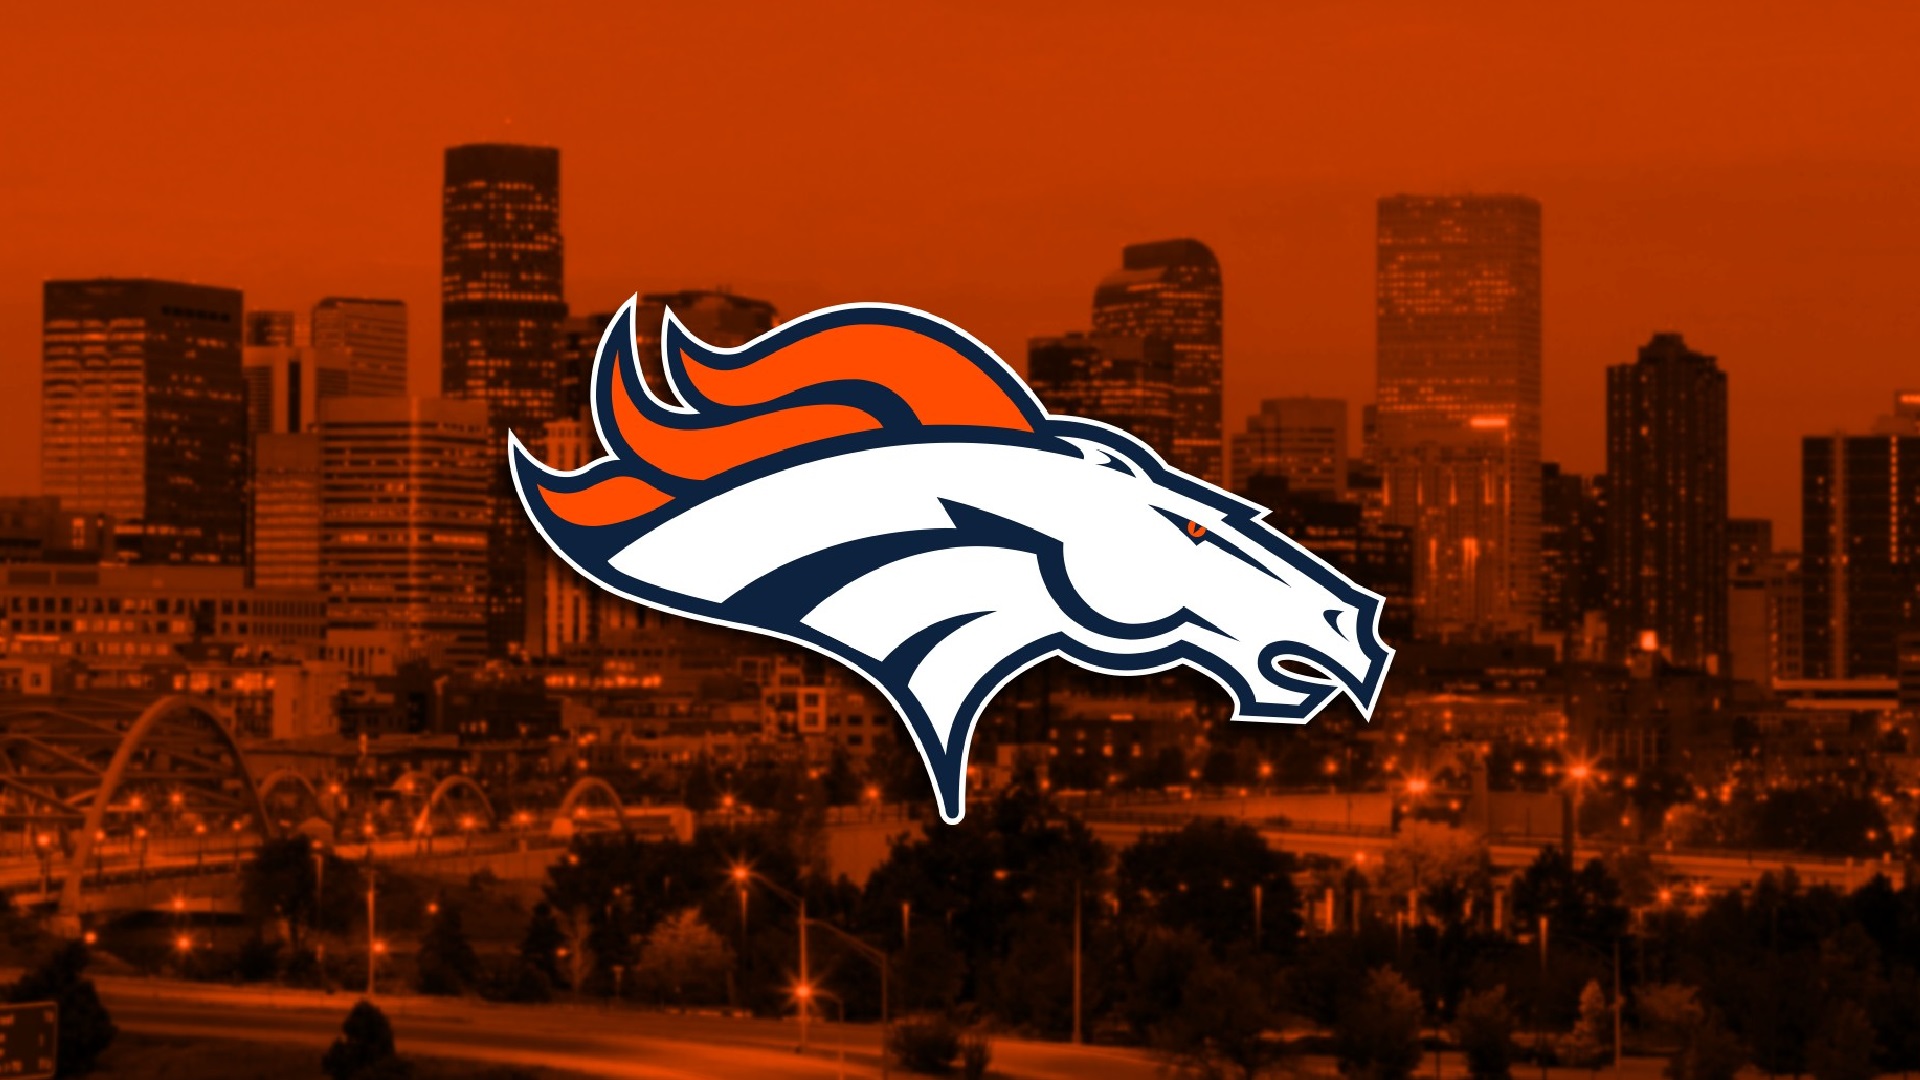 Best Denver Broncos Wallpaper in HD With high-resolution 1920X1080 pixel. Download and set as wallpaper for Desktop Computer, Apple iPhone X, XS Max, XR, 8, 7, 6, SE, iPad, Android